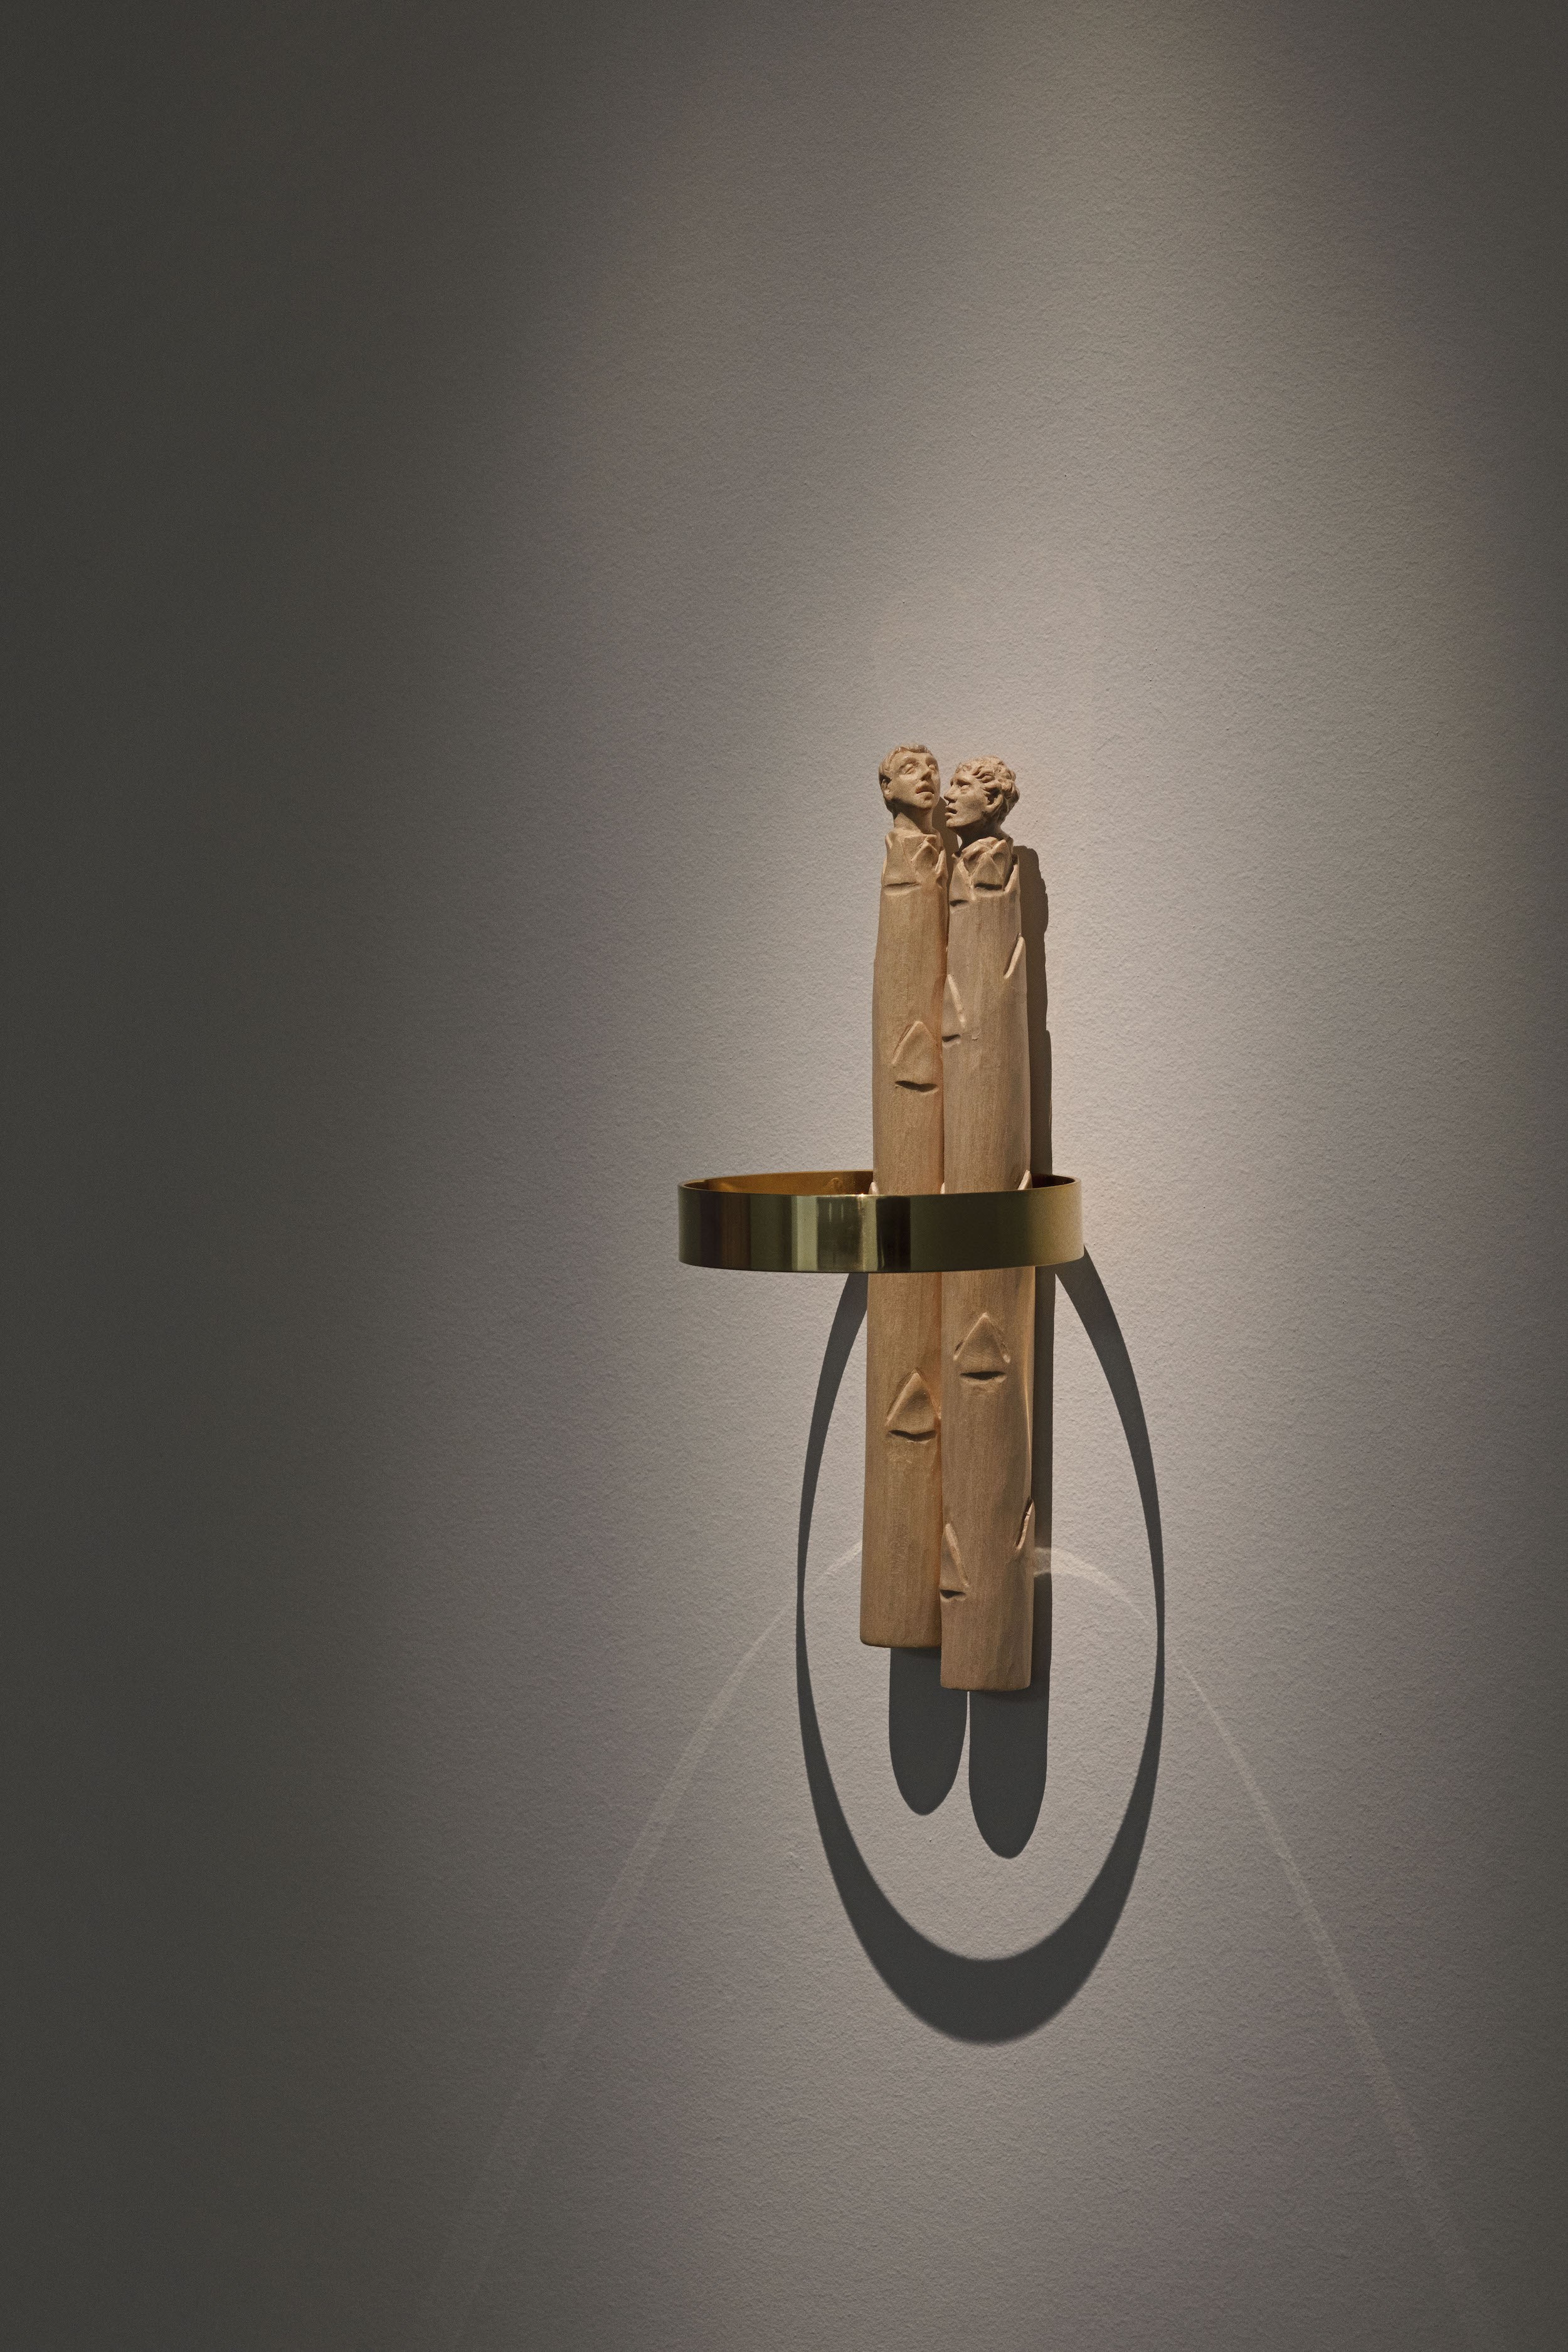 Young-jun Tak: Your Anticipation, 2022. Installation view O—Overgaden, 2023. Limewood, brass and beeswax 25.5 x 10.5 x 10.5 cm. Courtesy of the artist and Efremidis, Berlin.  Photo: Laura Stamer